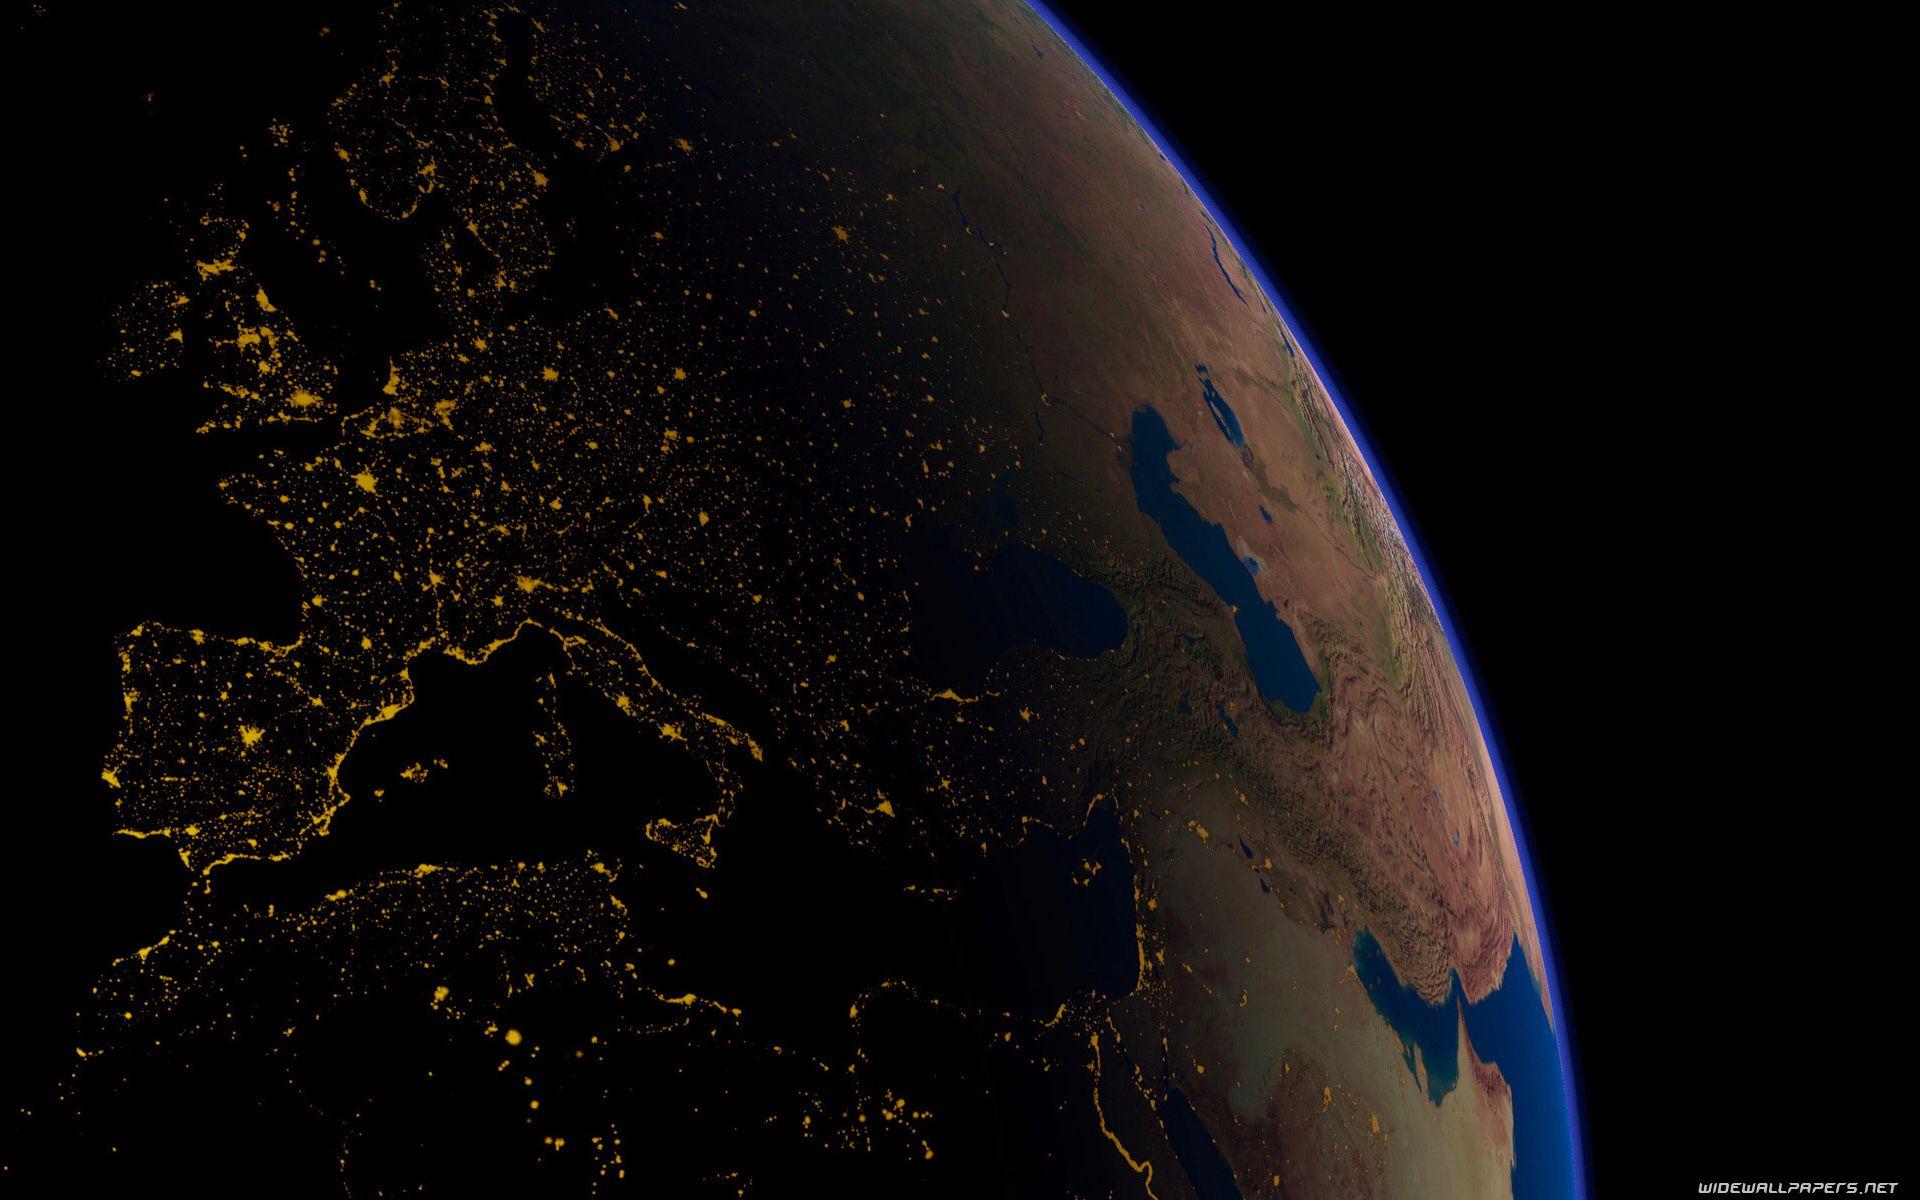 Earth From Space Wallpaper Free Desktop. I HD Image